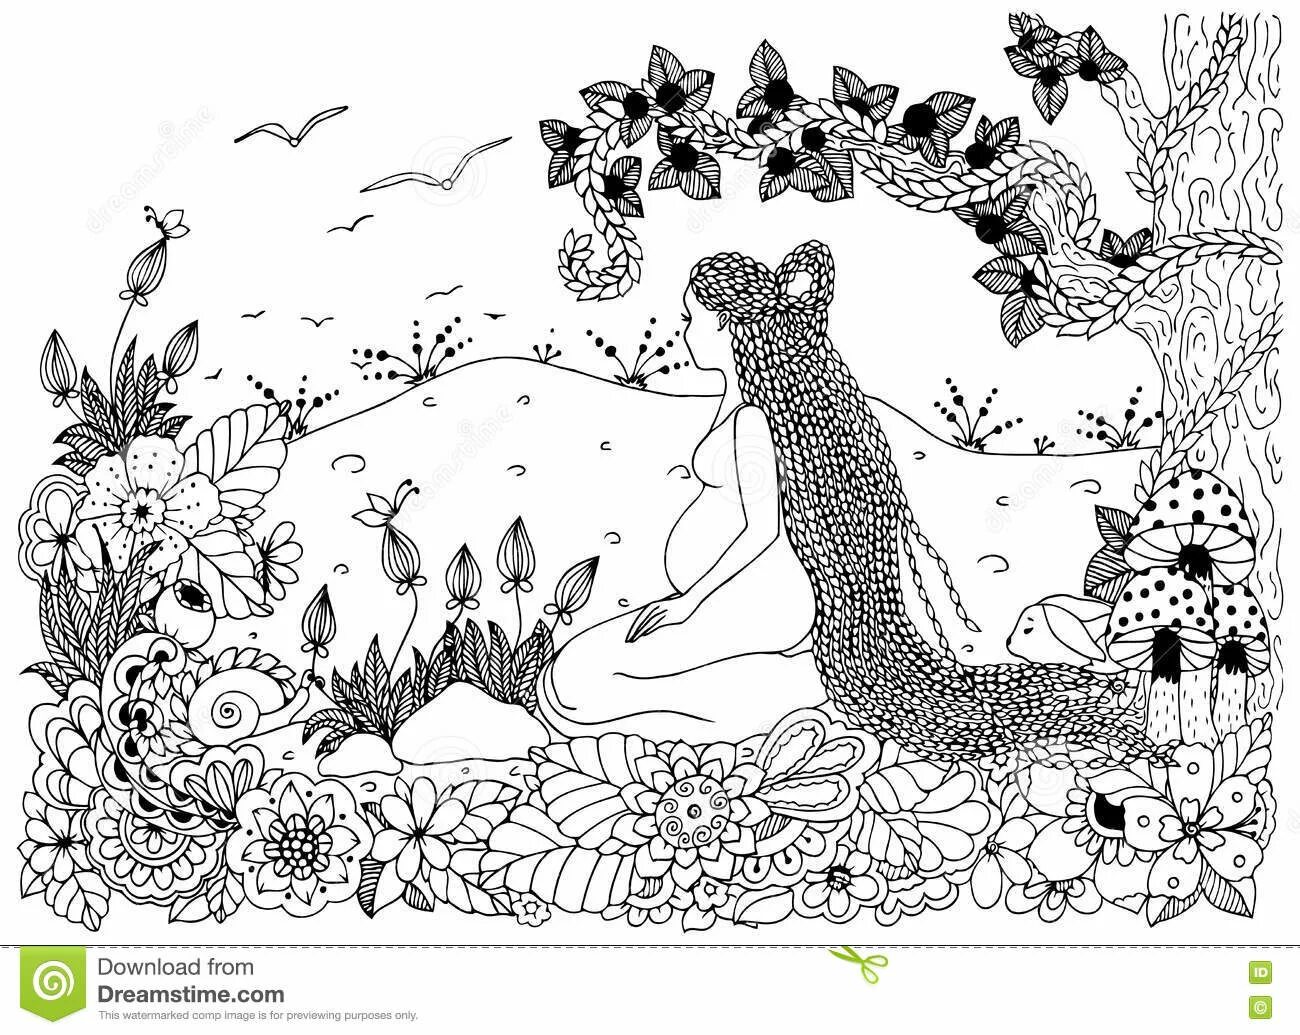 Glowing maternity coloring book